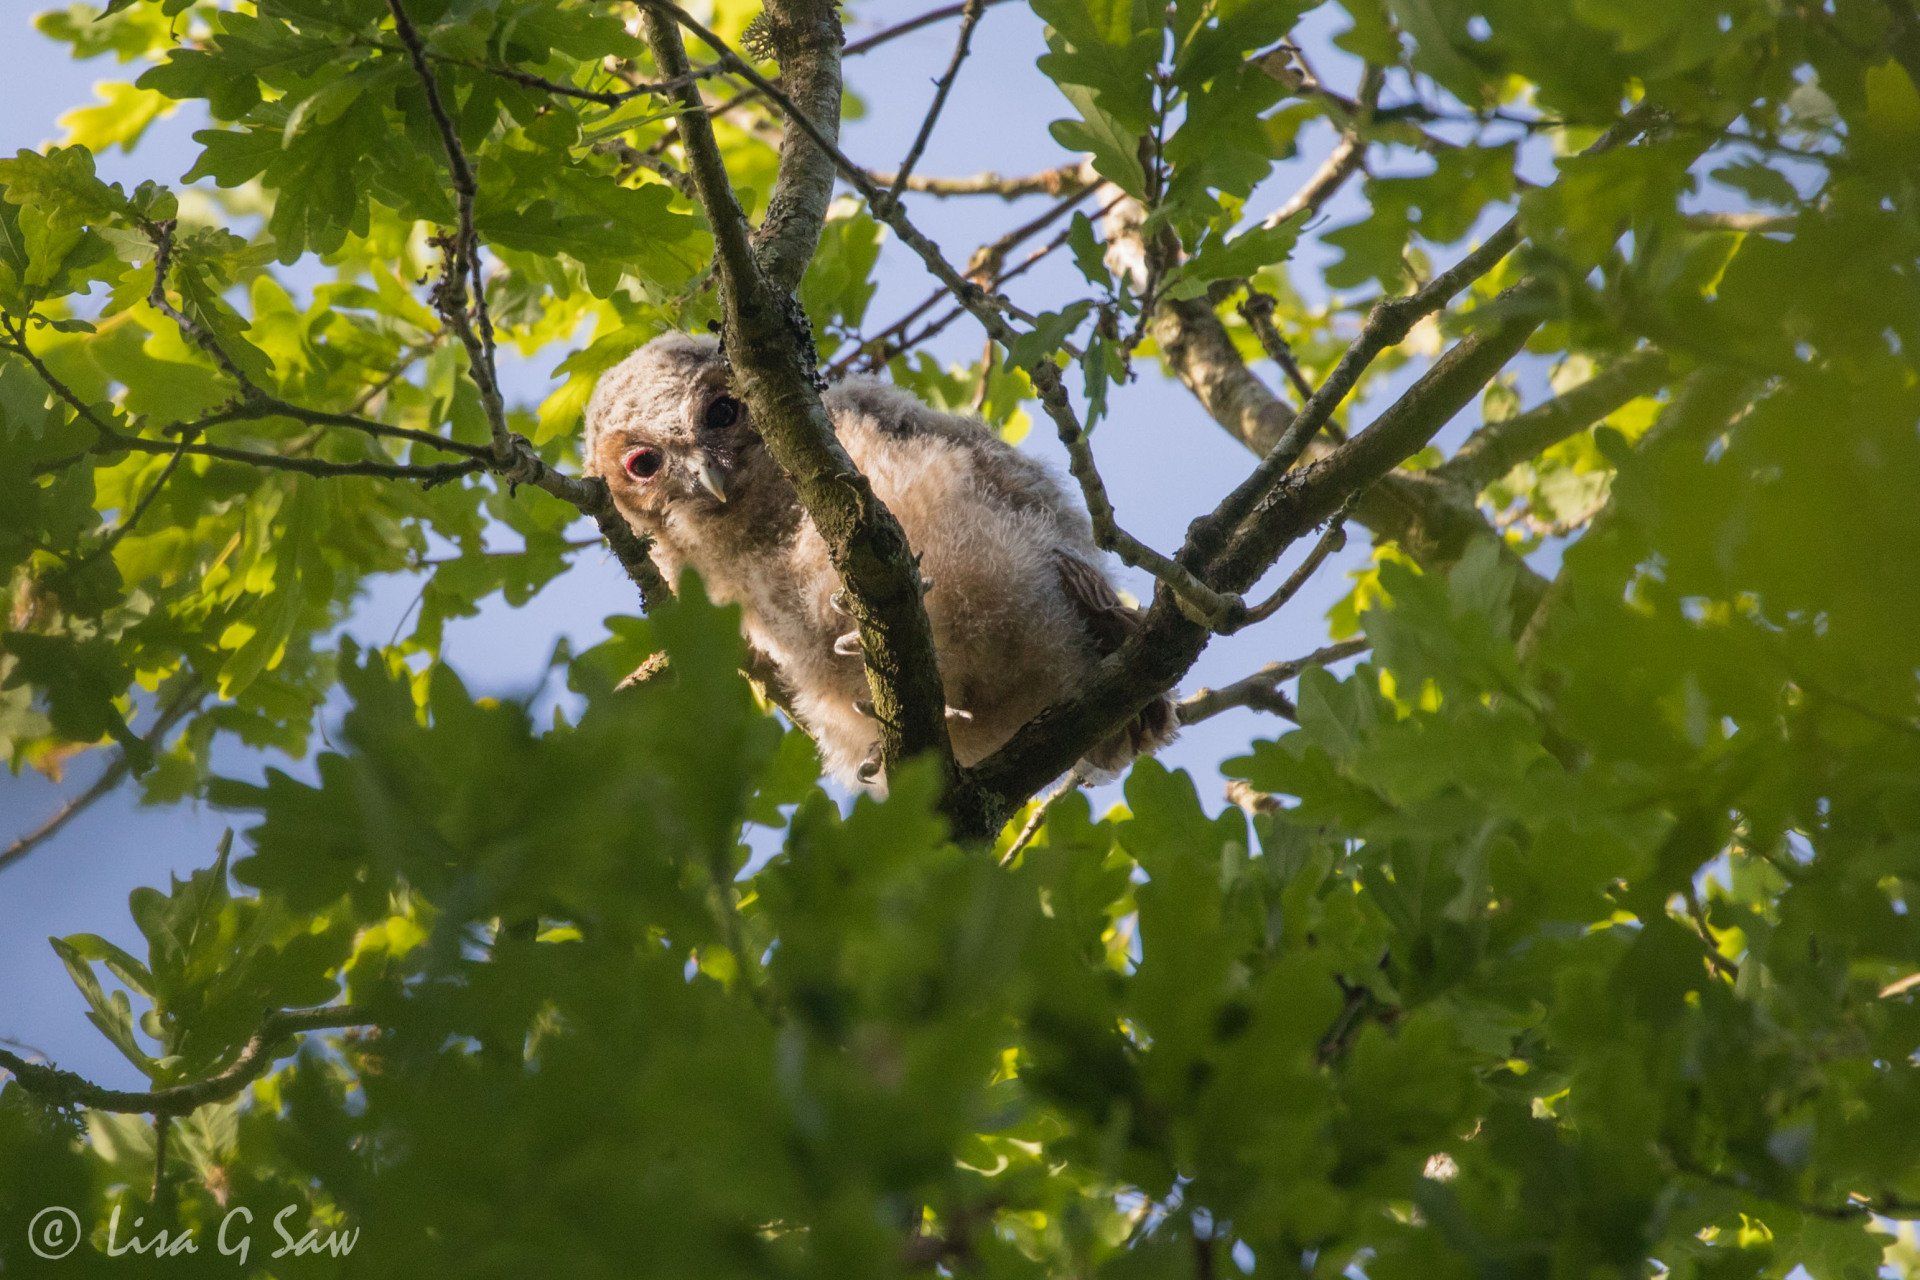 Tawny Owlet peering down from tree branch